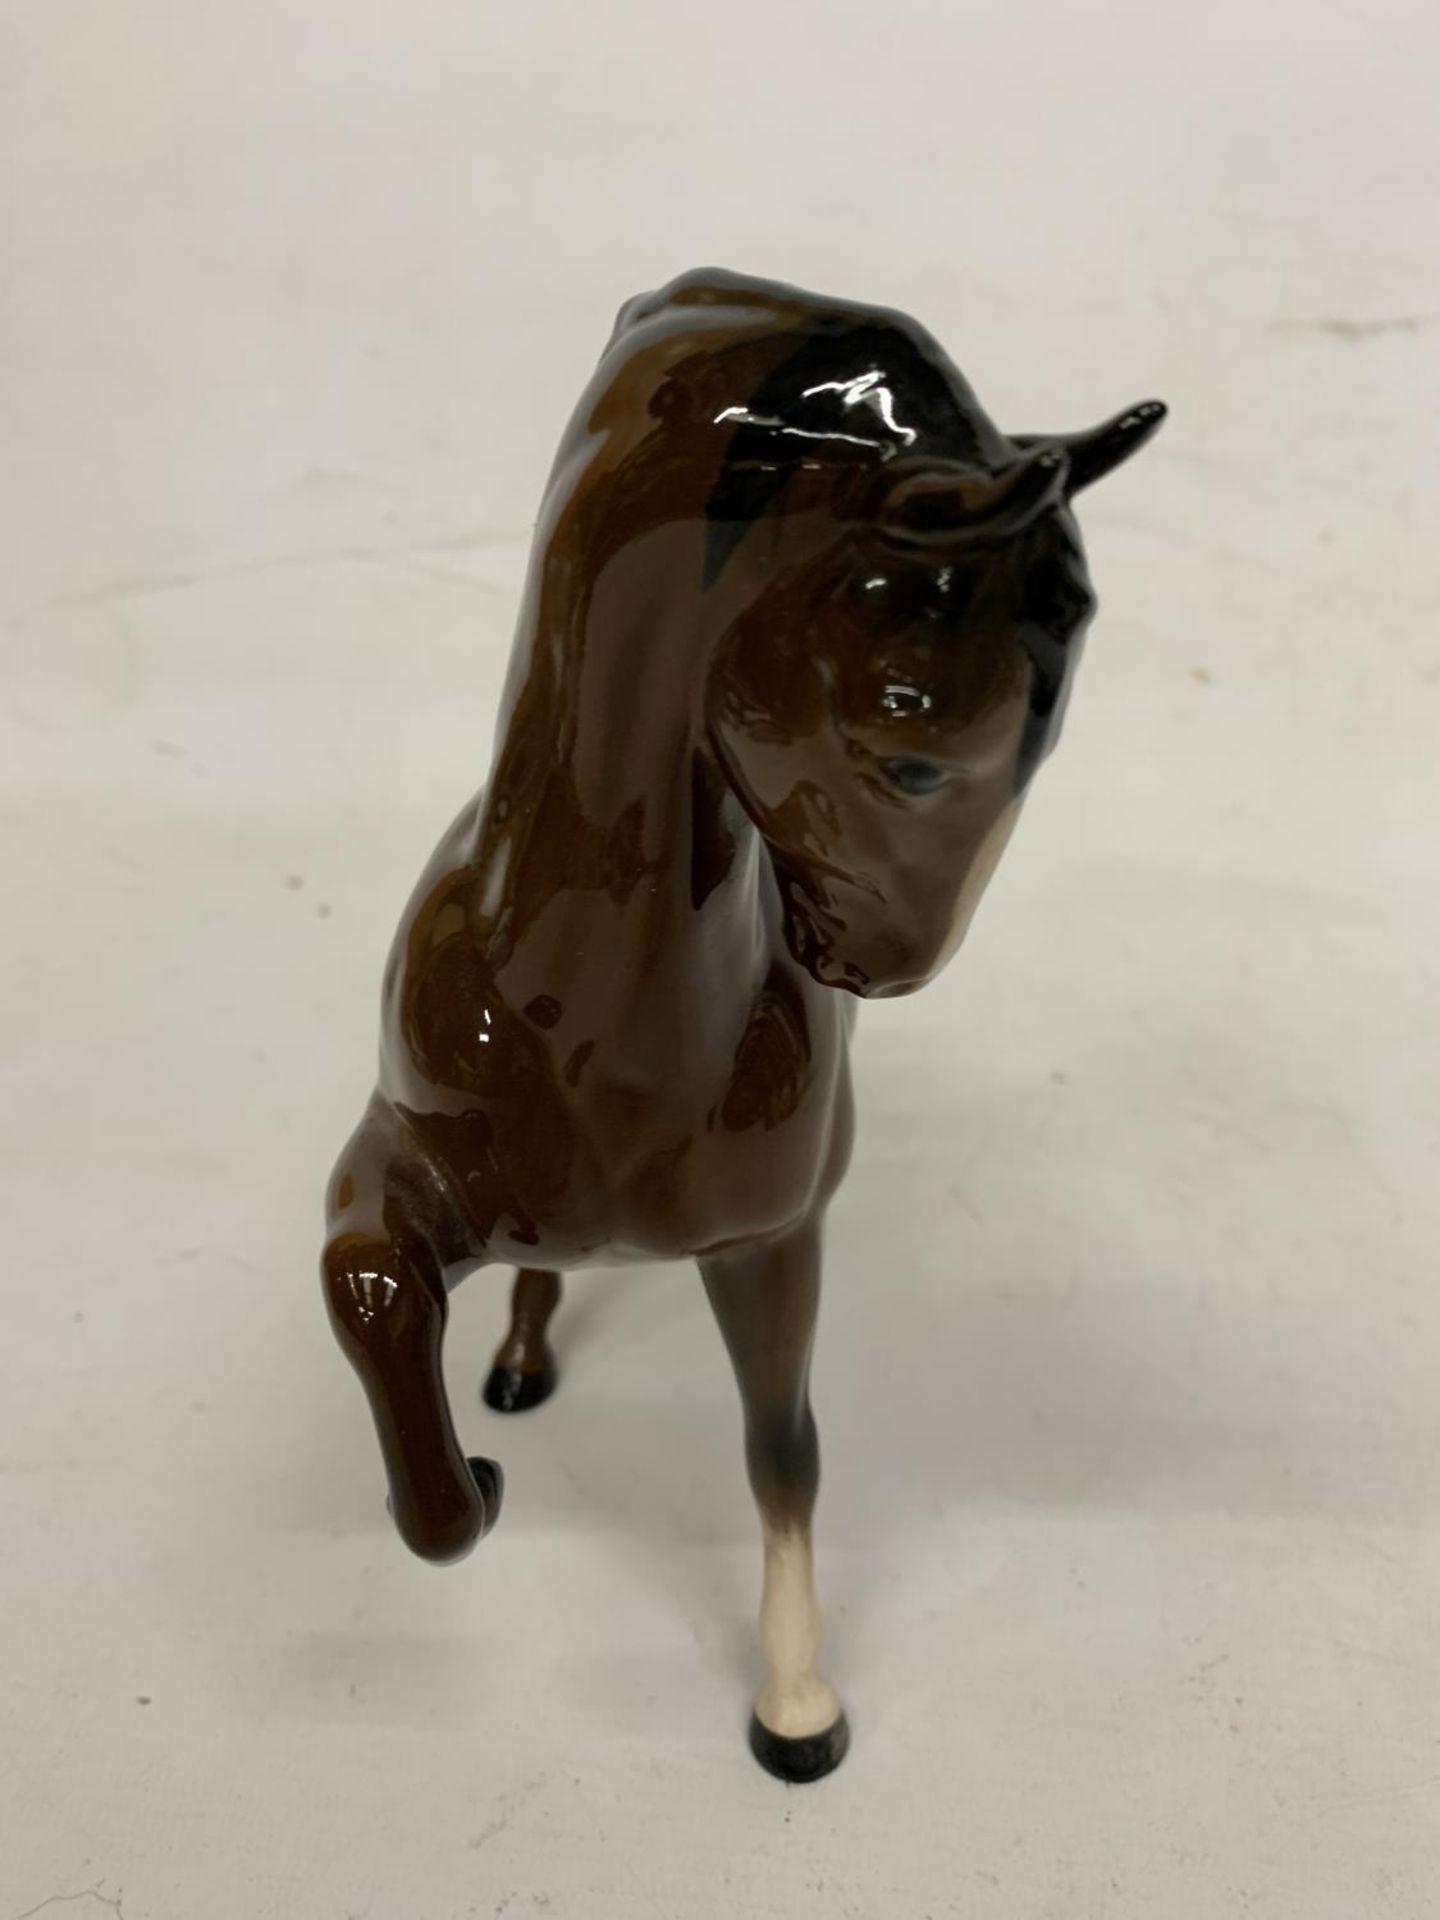 A BOXED ROYAL DOULTON FIGURE OF A PRANCING STALLION - Image 2 of 4